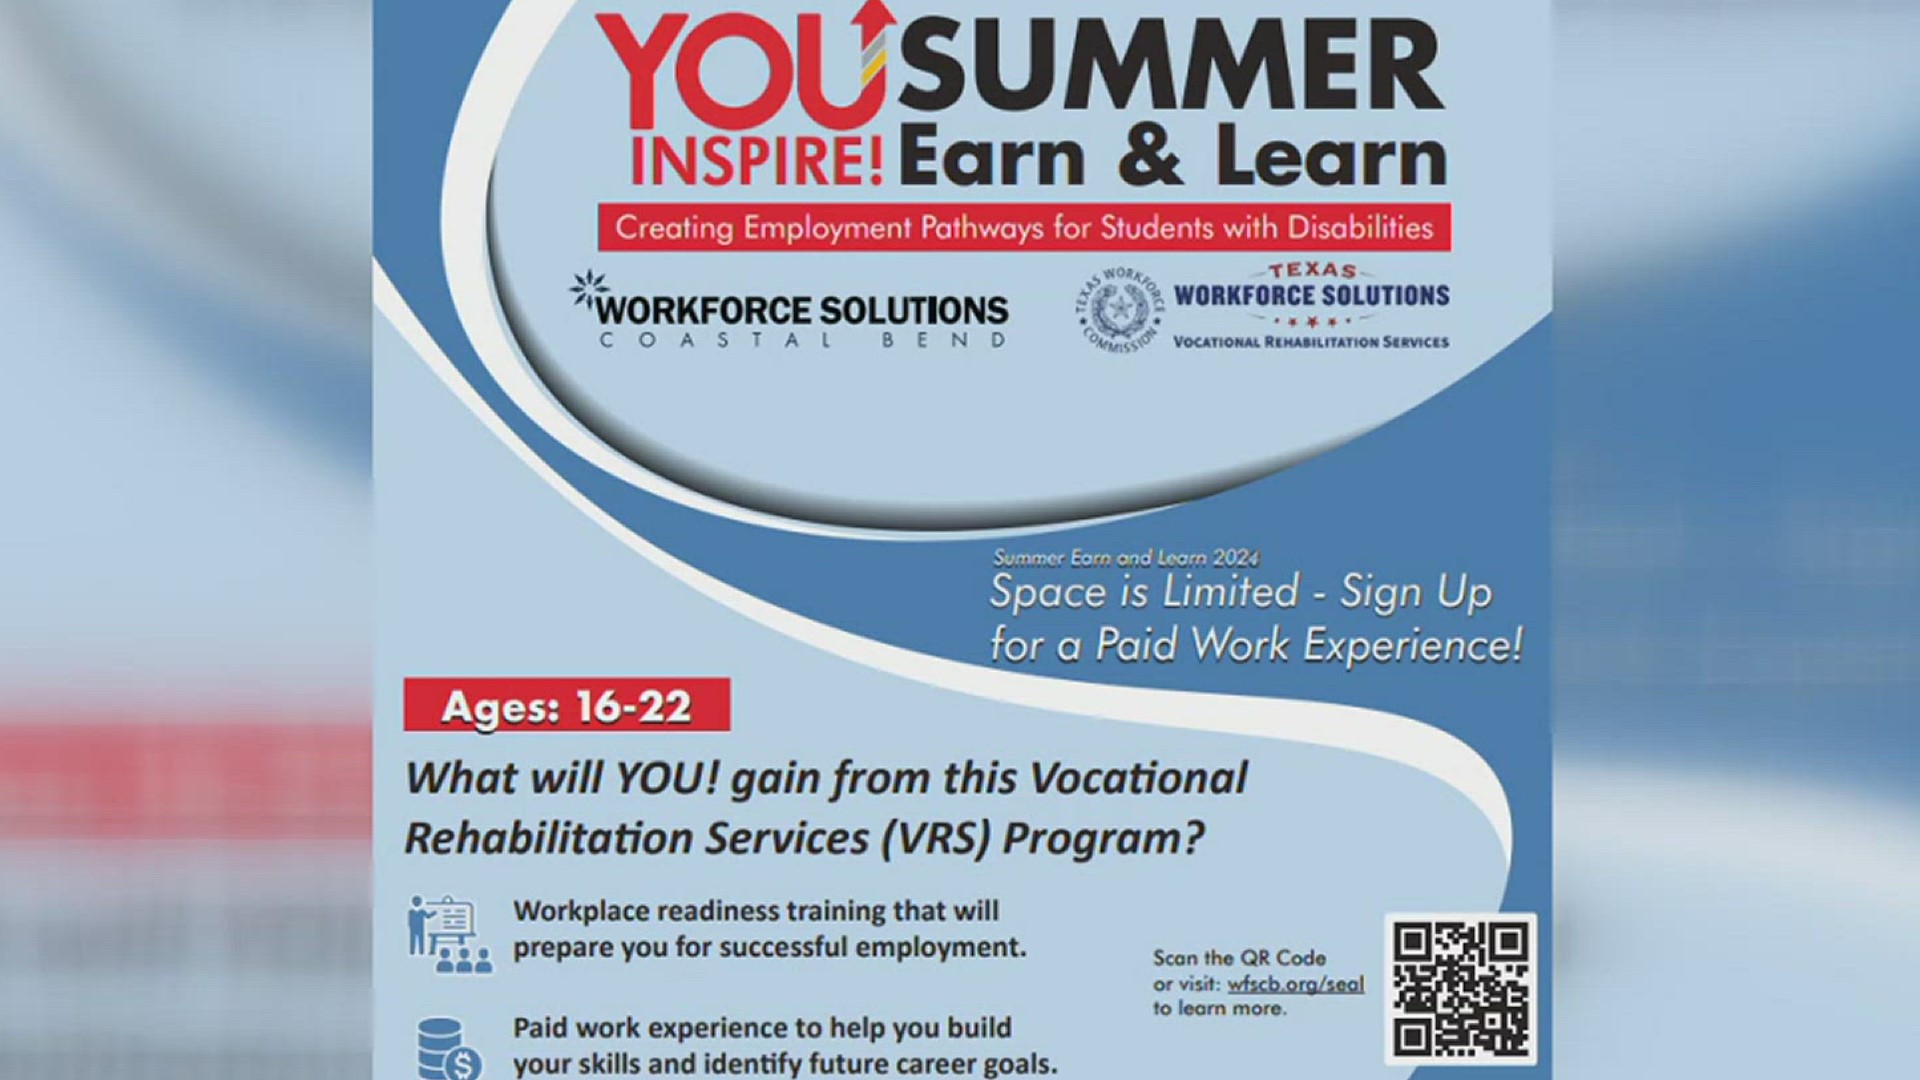 The Workforce Solutions program offers individuals with disabilities age 16 to 22 to sign up for a job and learn all of the responsibilities that come with it.